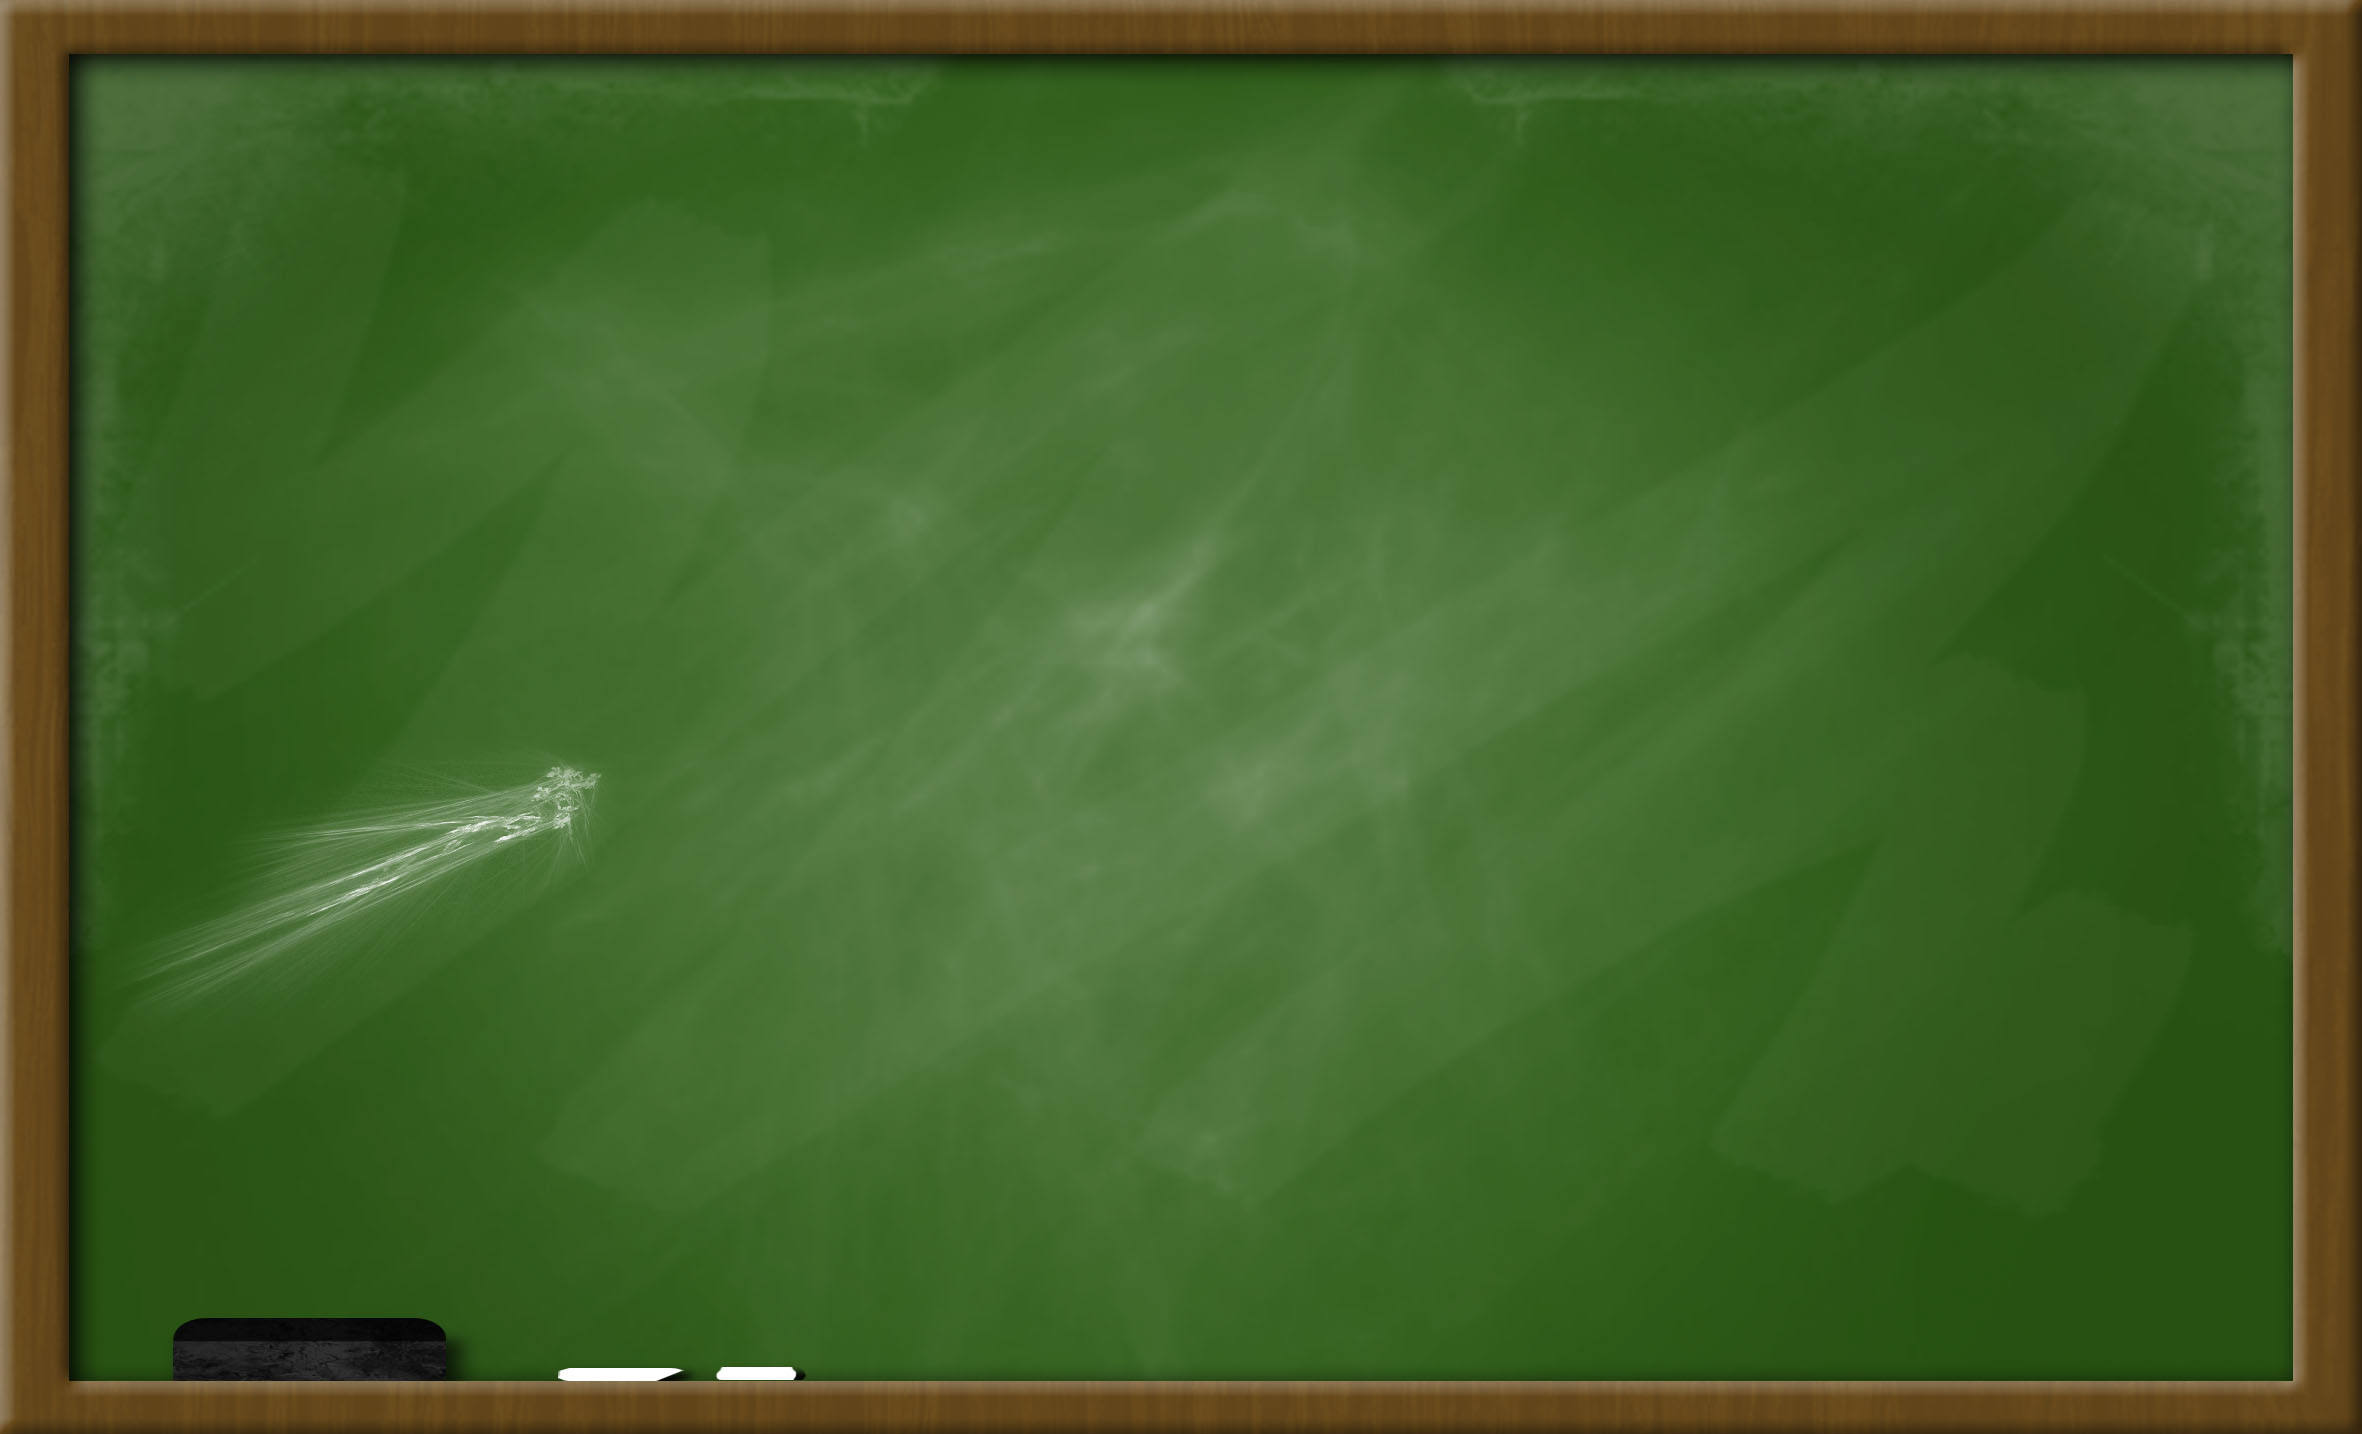 Free Download Chalkboard Pictures